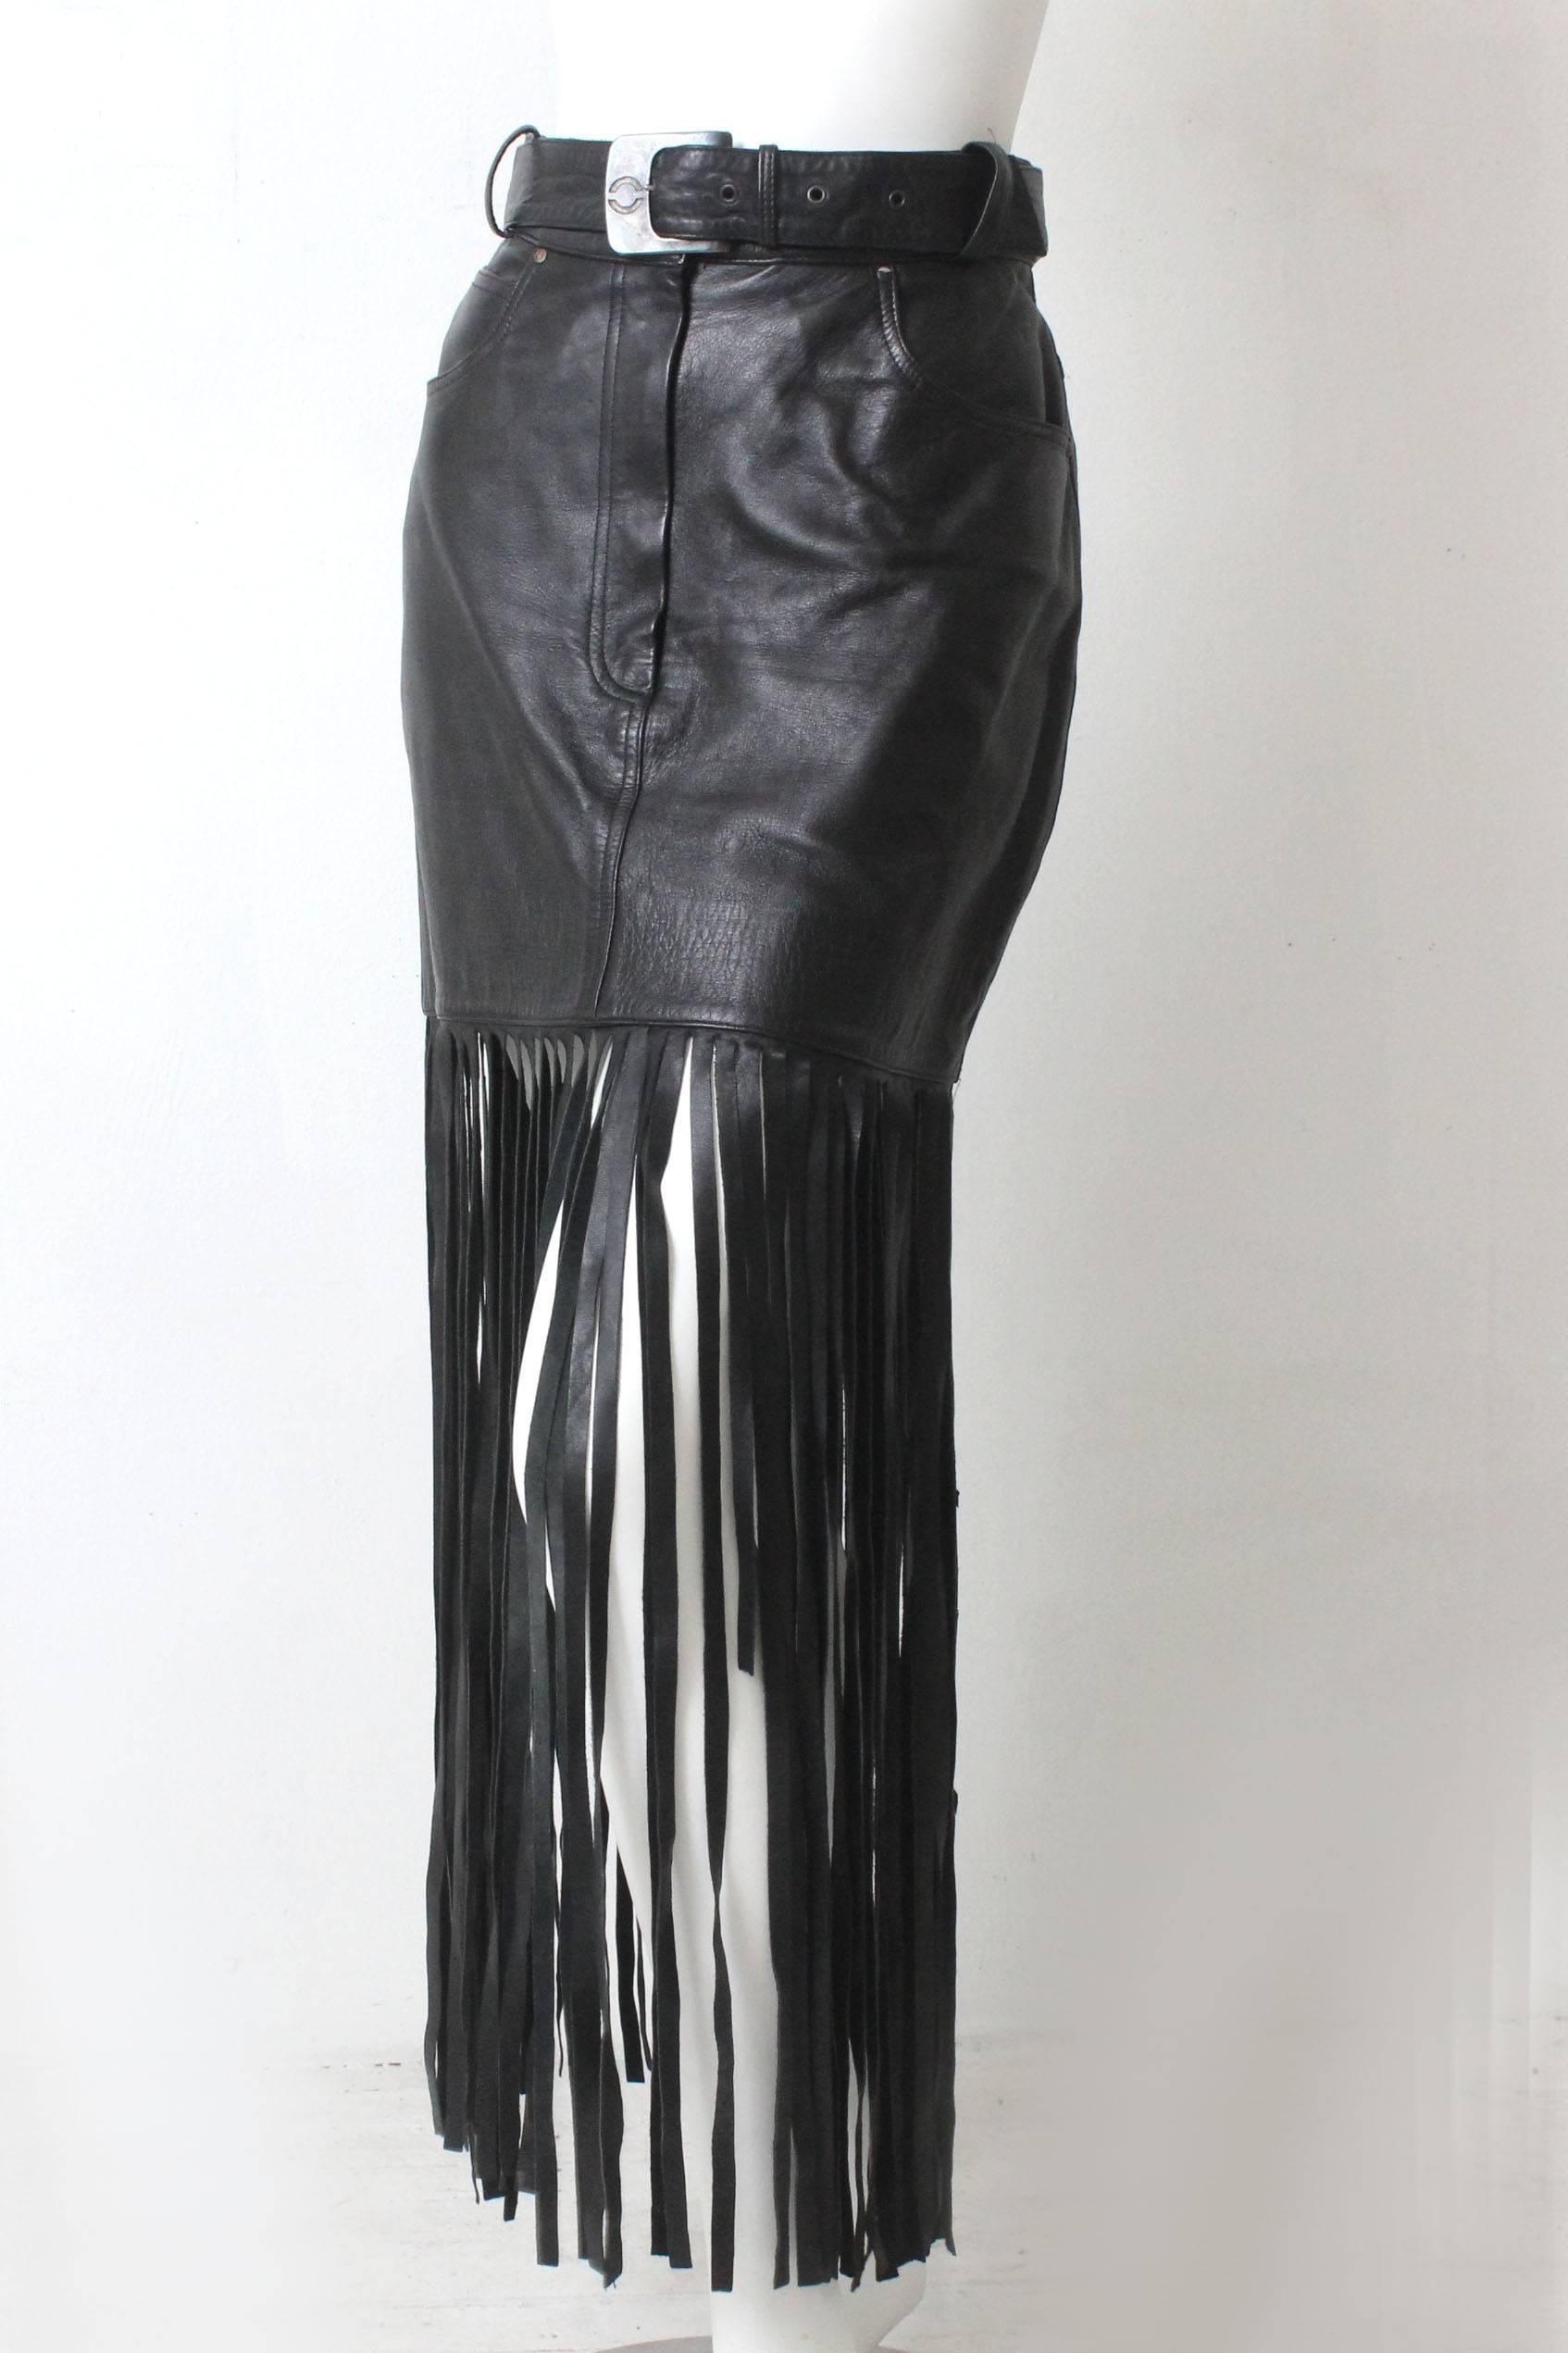 This butter soft body hugging leather skirt is by Claude Montana. It is a very sexy design with floor length fringe. It comes with a matching belt in black leather with a gun metal buckle that is stamped with a Claude Montana C logo.